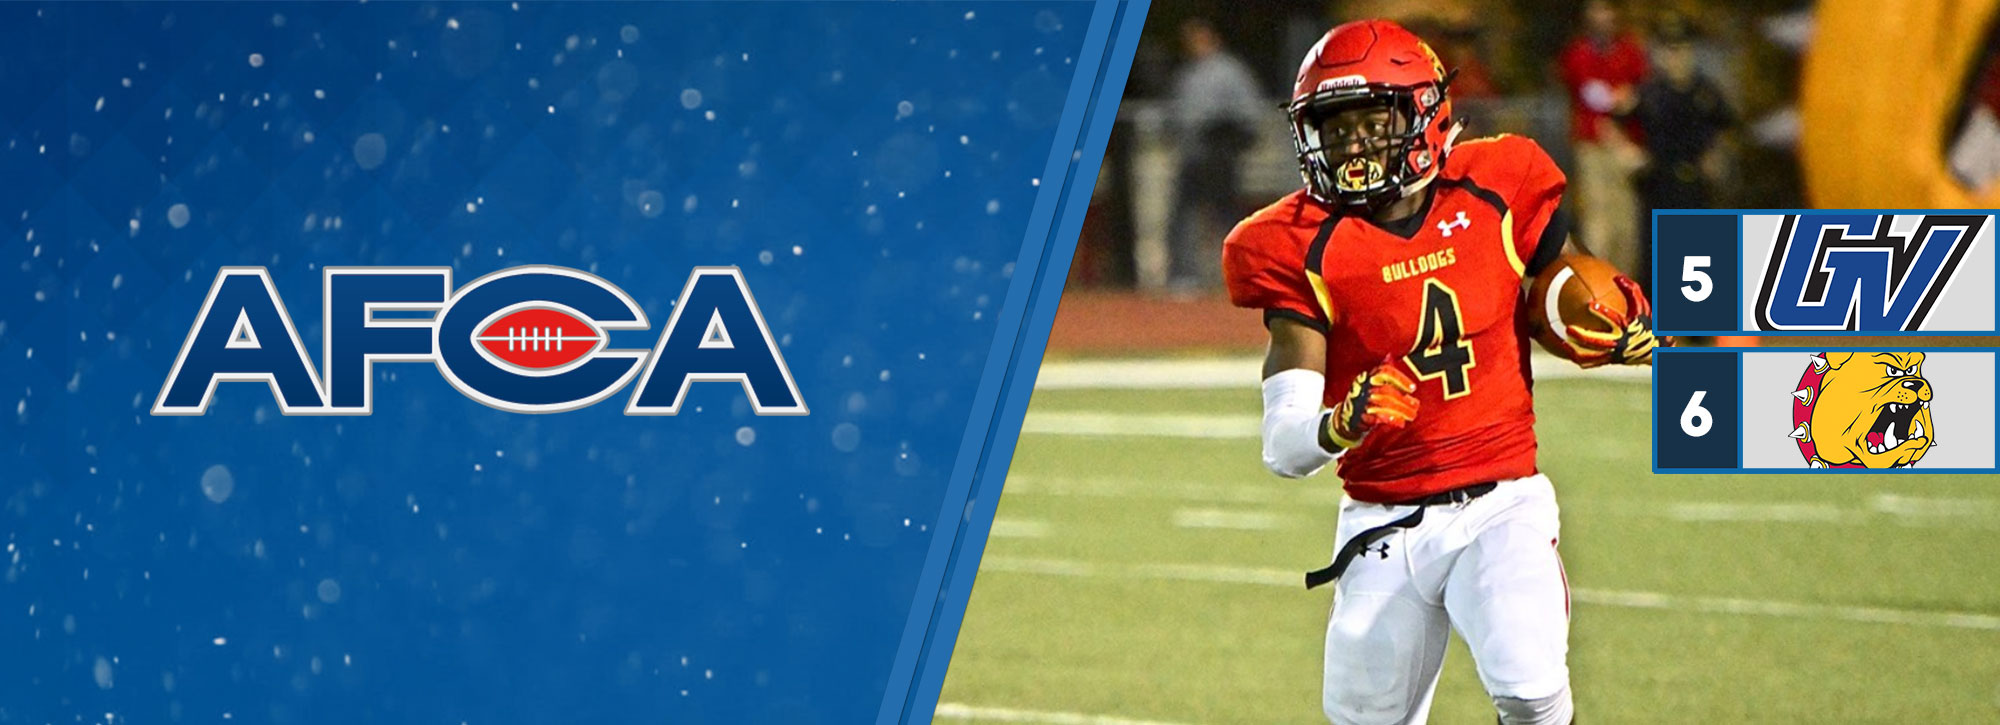 Grand Valley State Improves to No. 5, Ferris State No. 6 in Latest AFCA Rankings